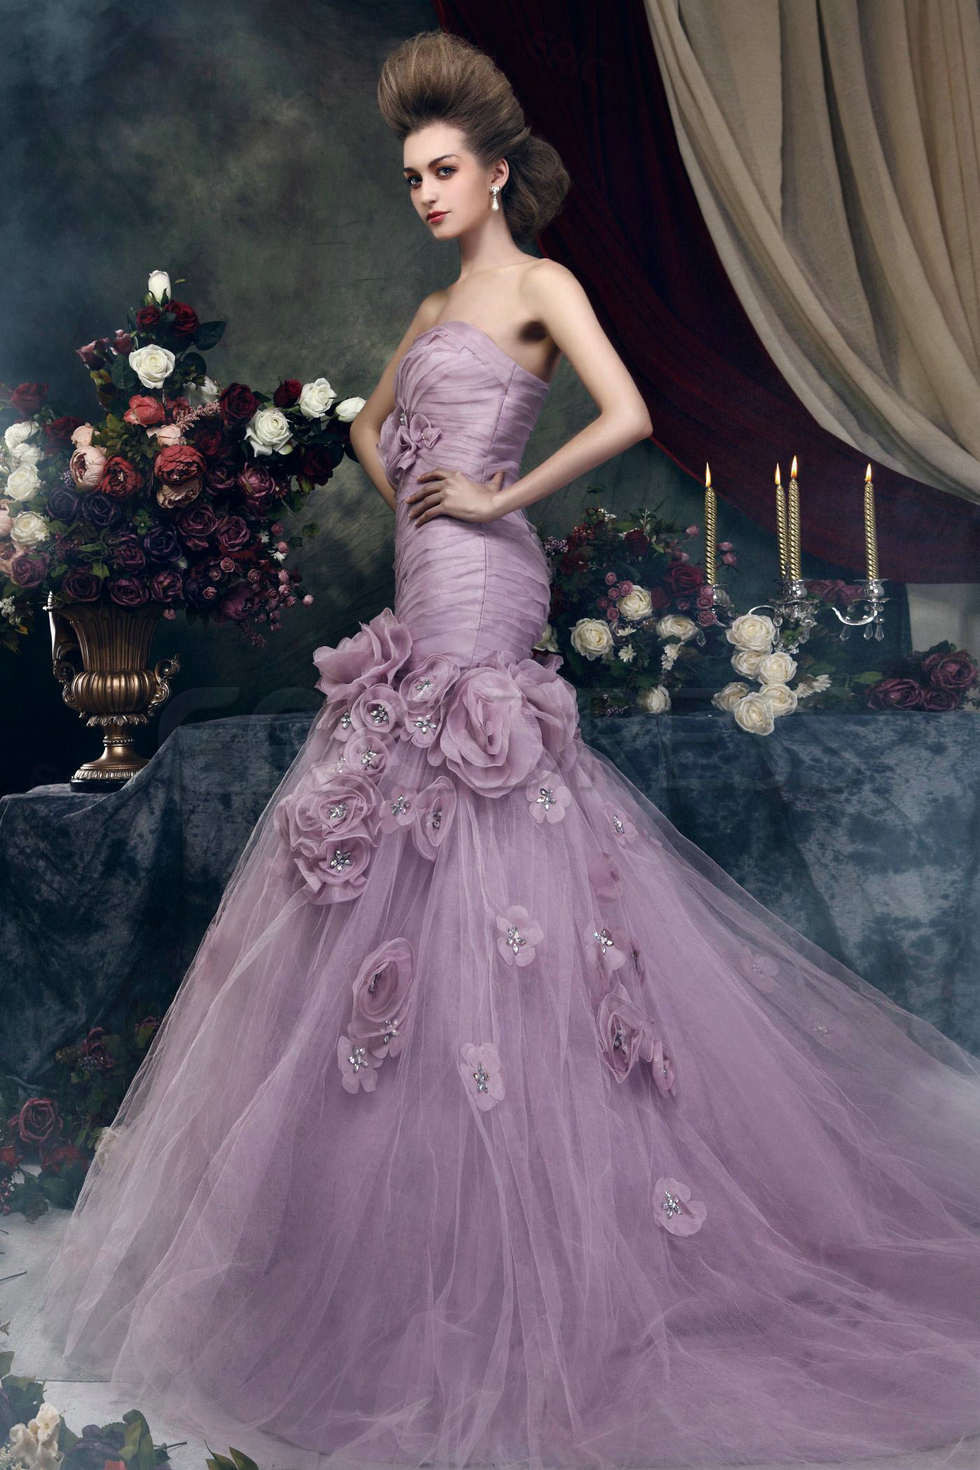 Purple Wedding Gown
 Colored wedding dresses are more and more popular